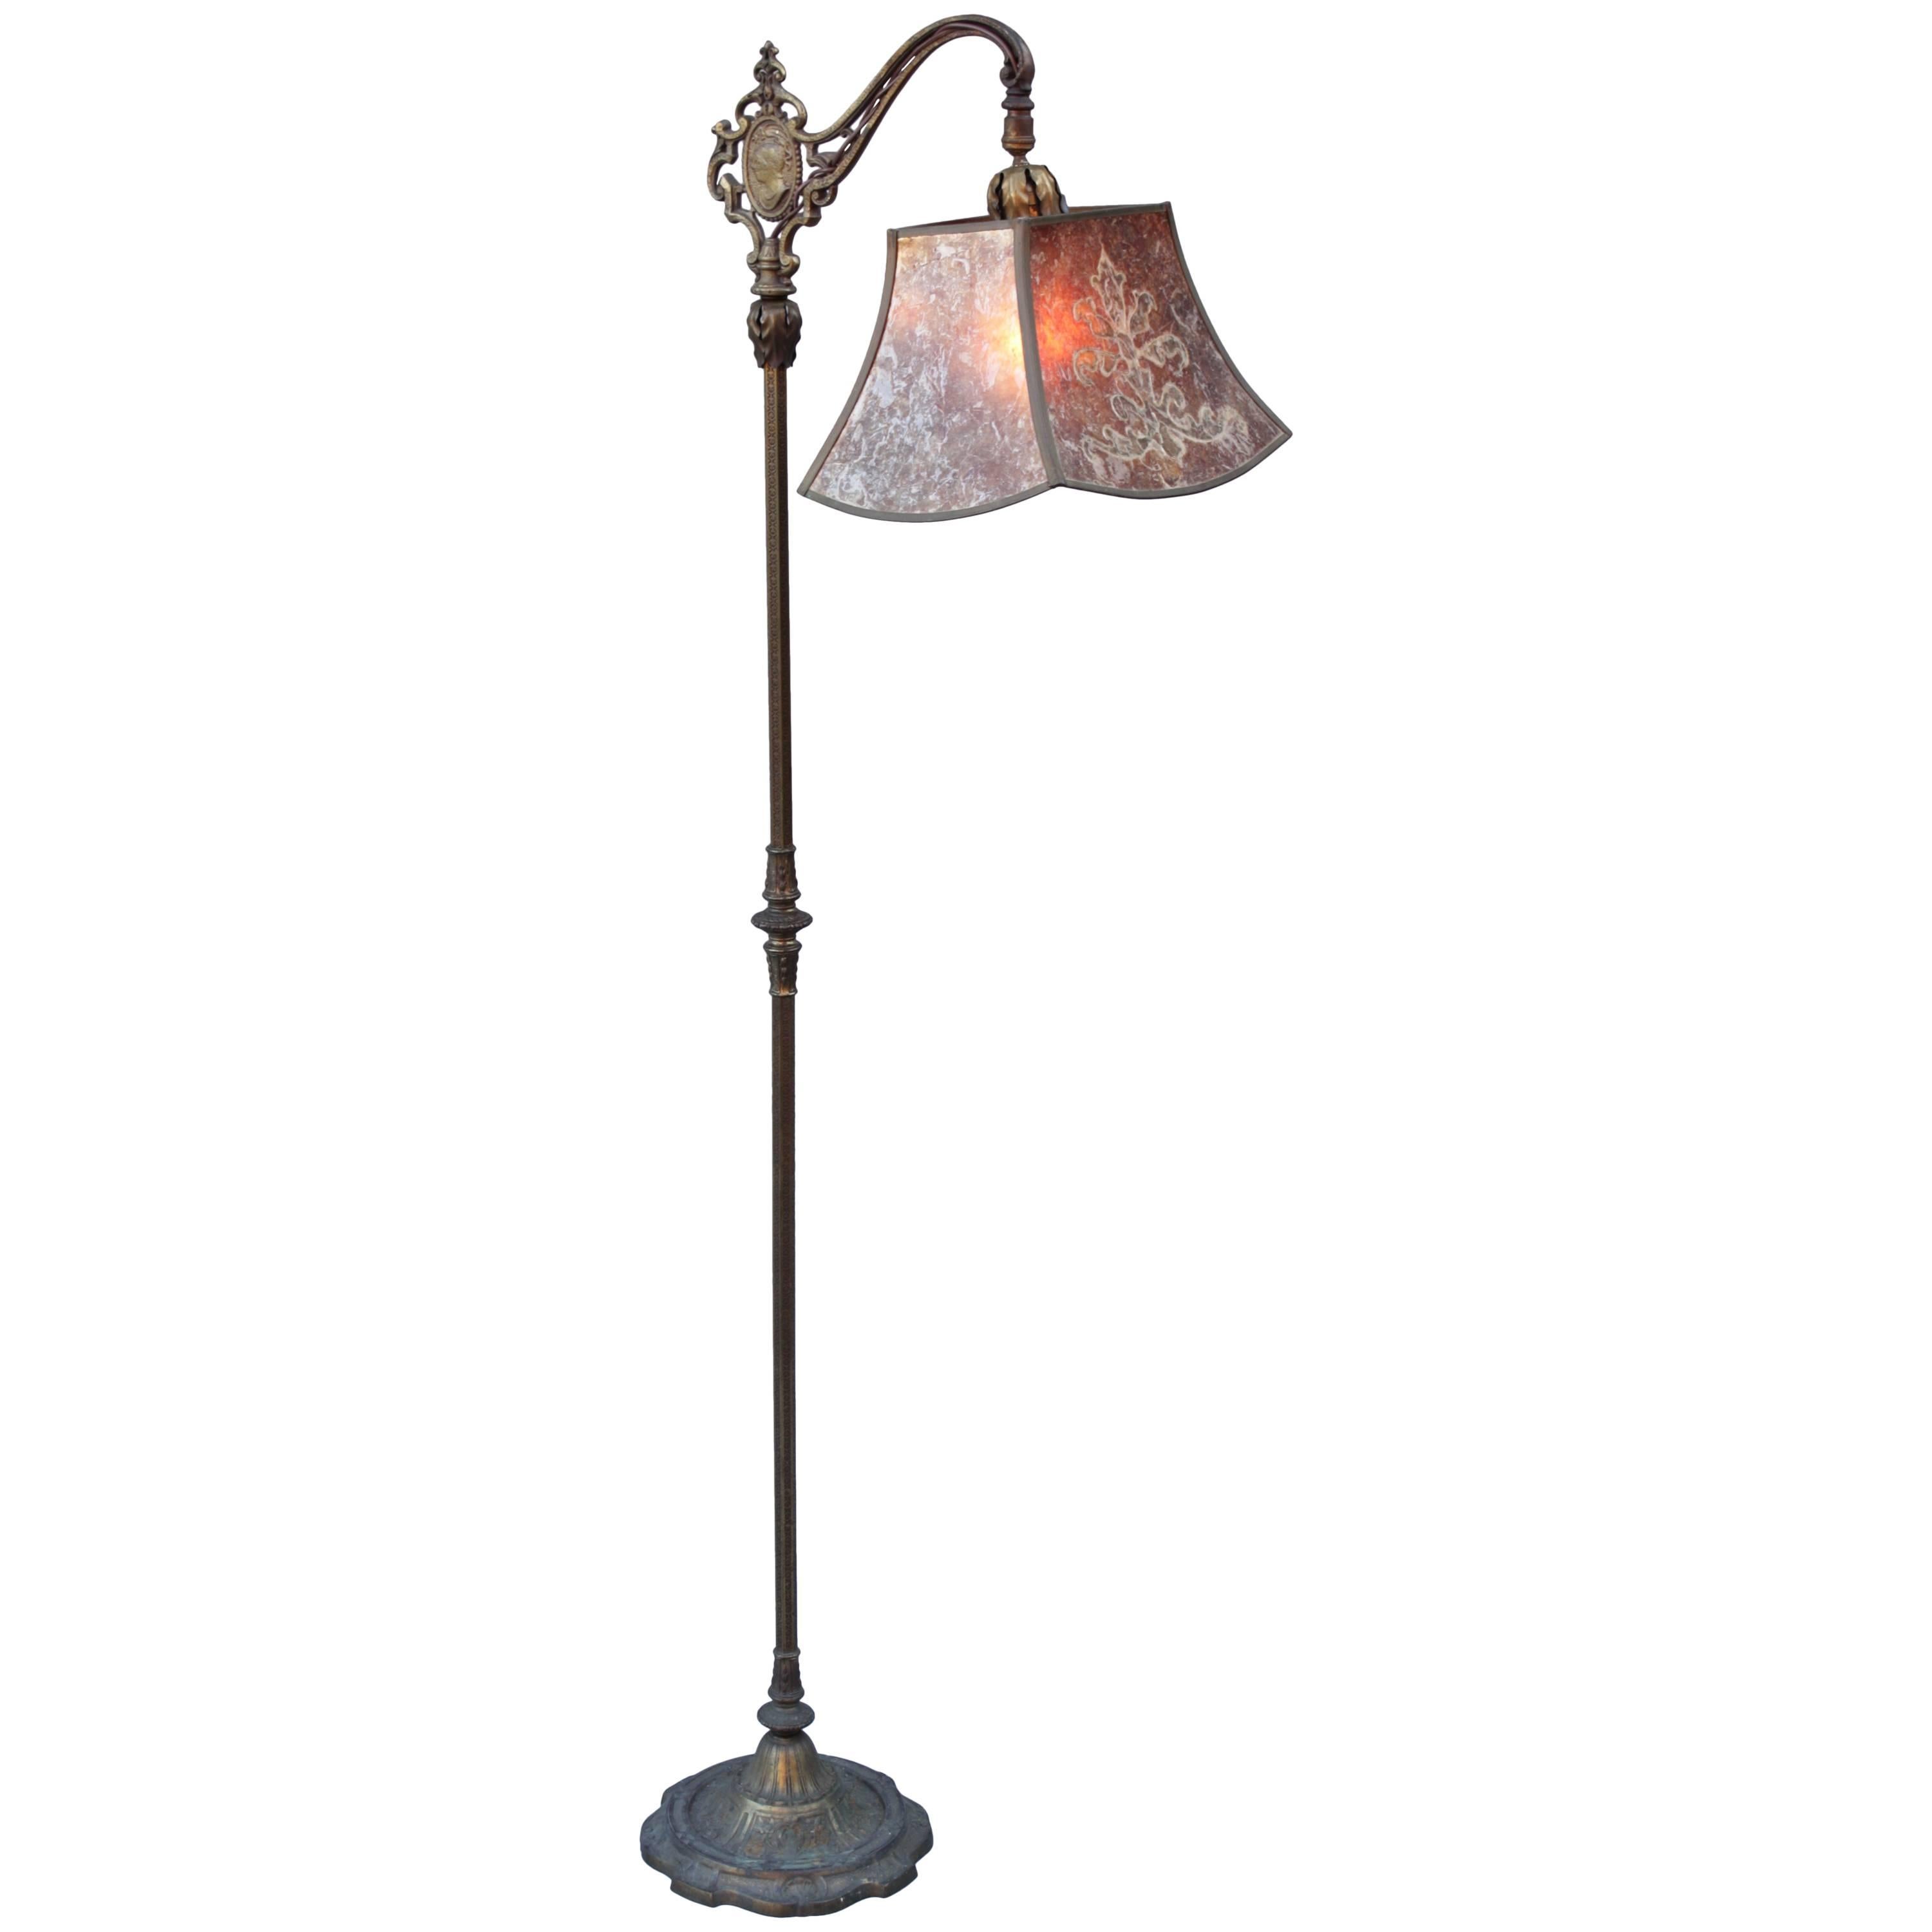 1920s Spanish Revival Floor Lamp with Exceptional Original Mica Shade